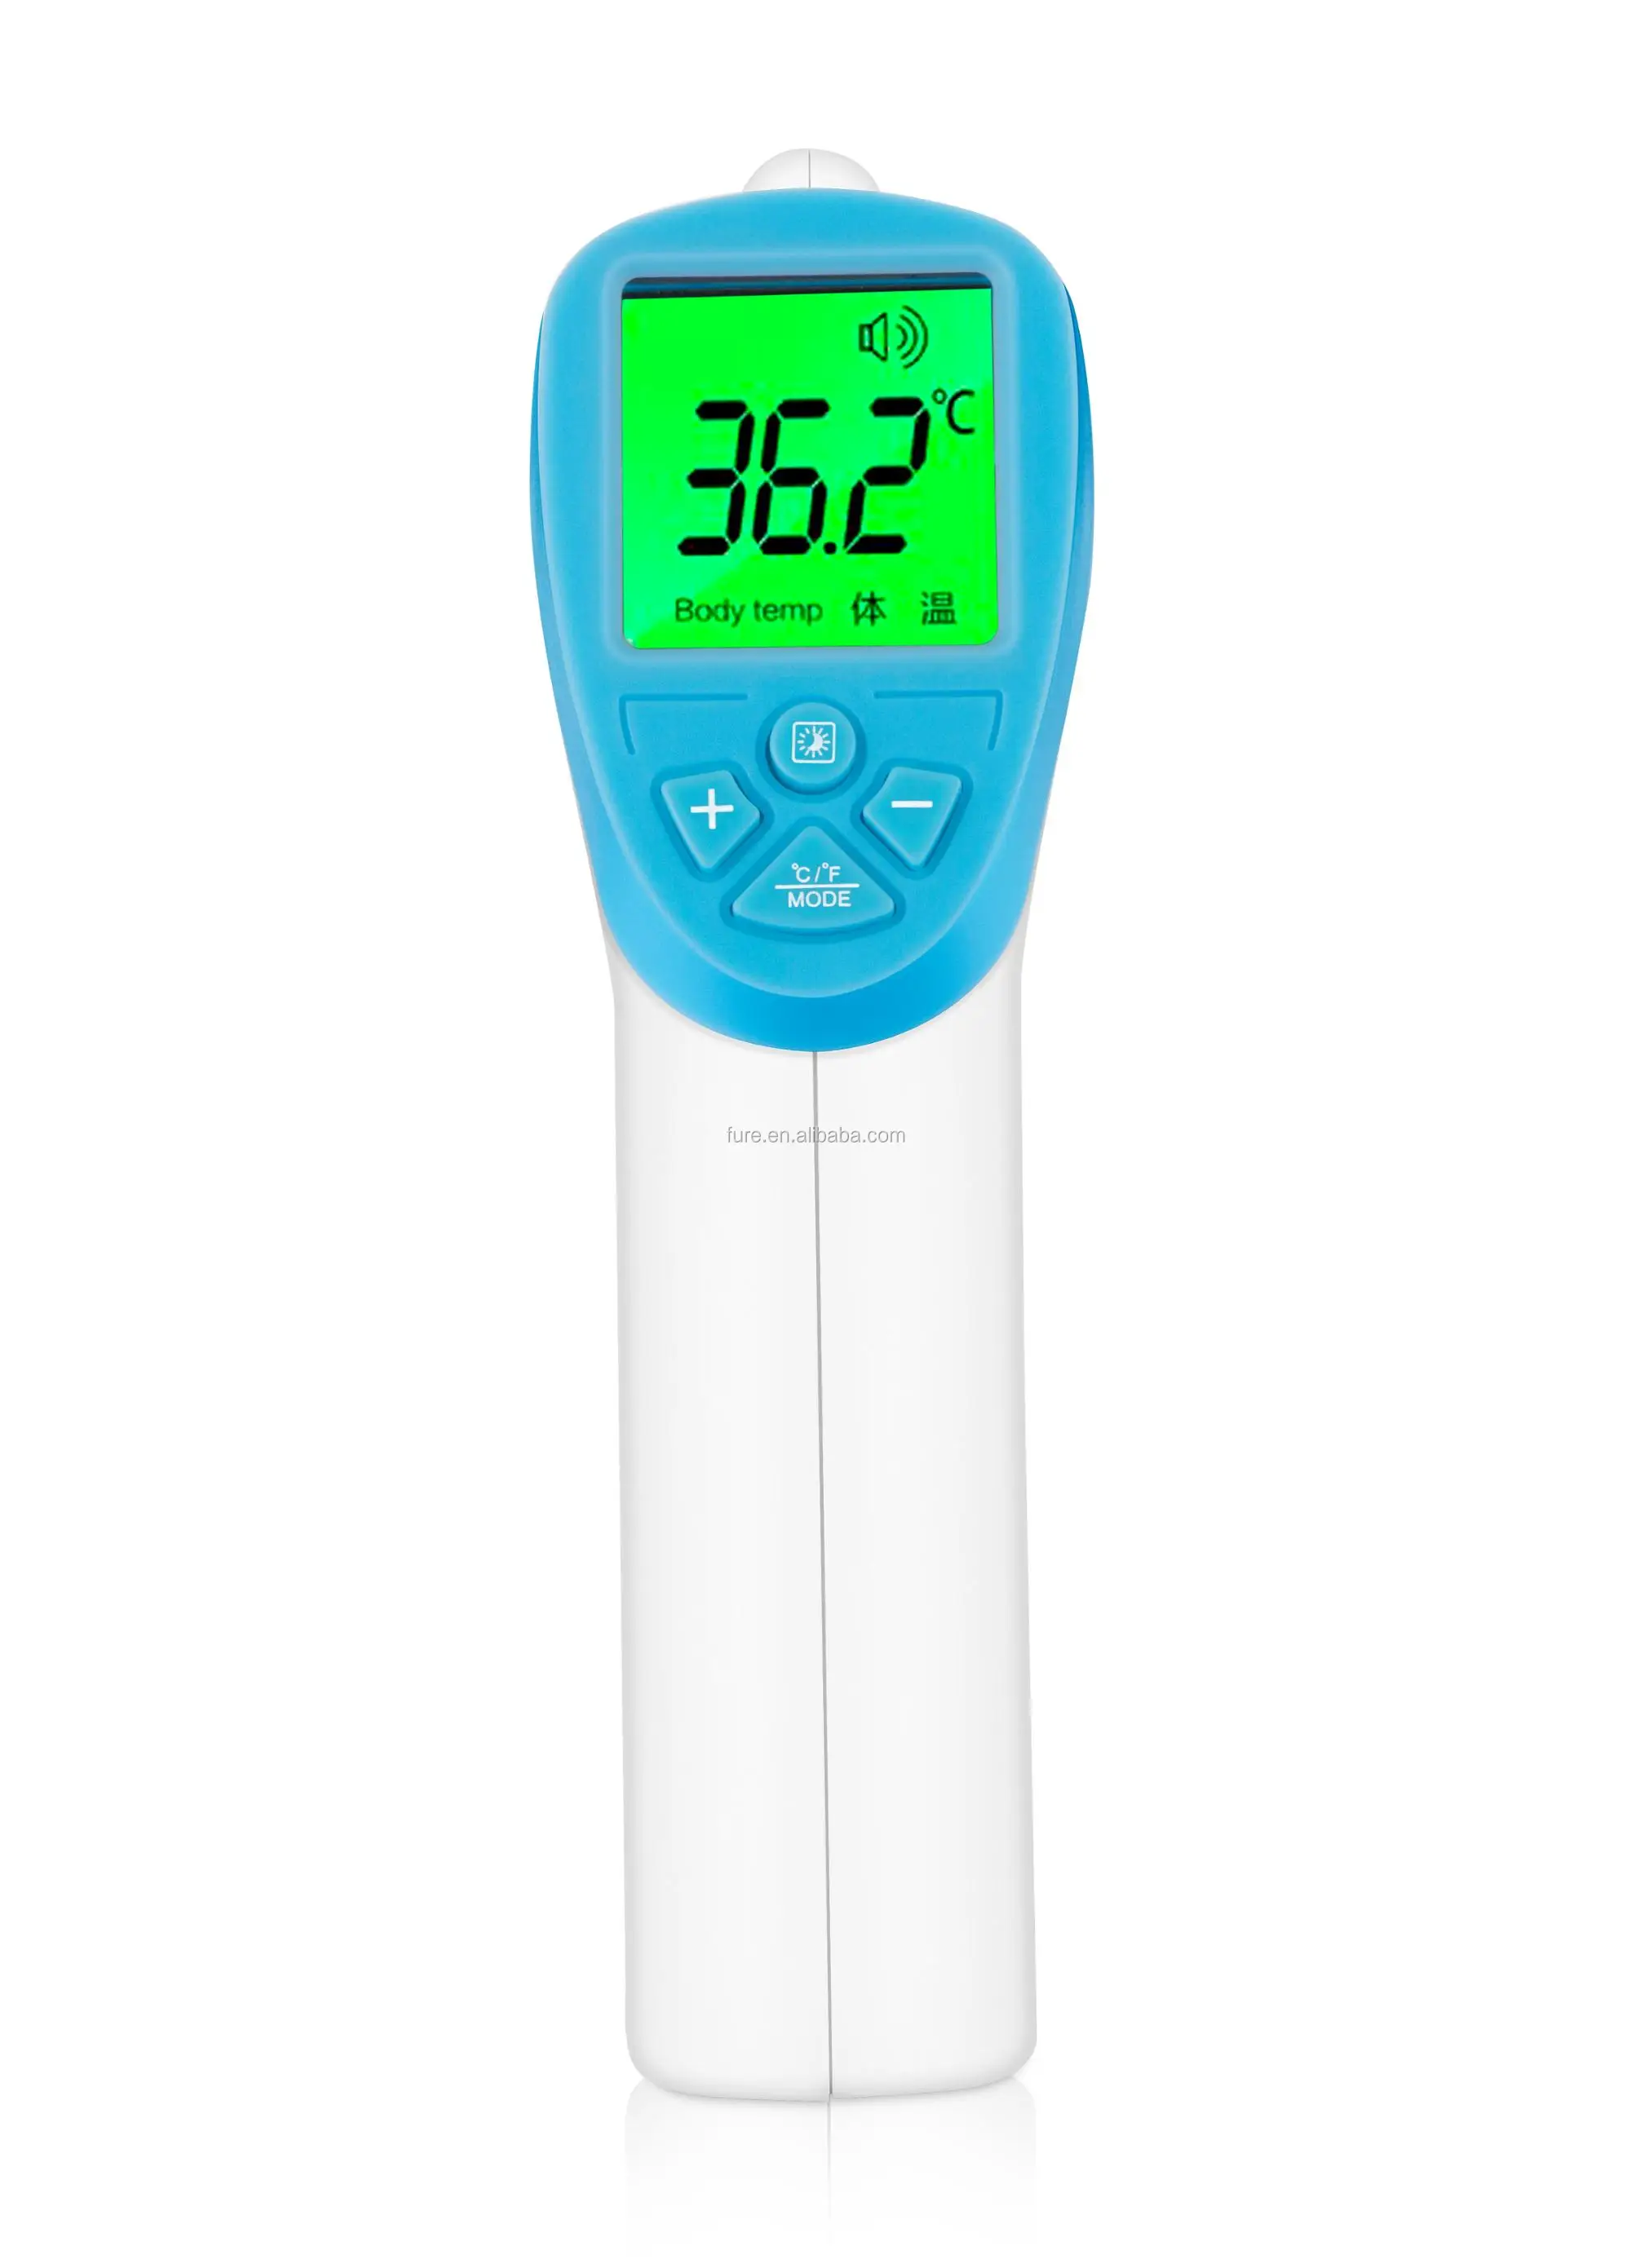 IT-122 Digital Infrared Forehead / Ear Thermometer for Baby Fever Temperature